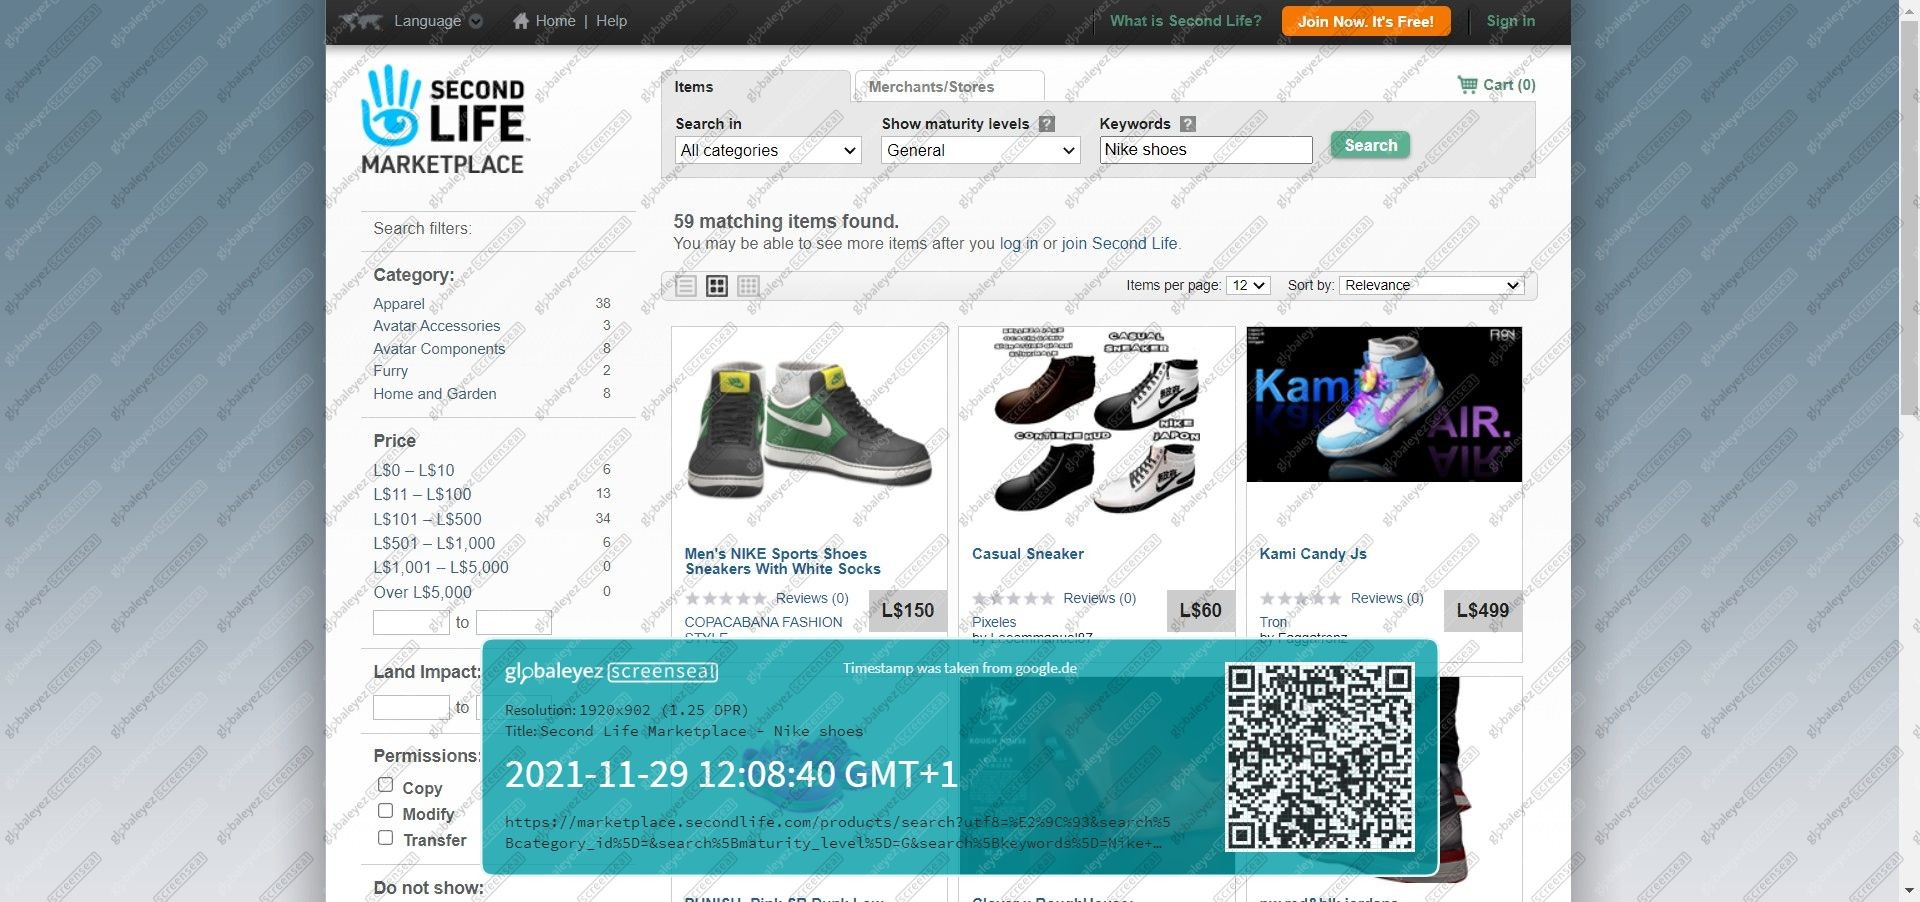 Screenshot of Second Life marketplace listings of Nike products from secondlife.com.